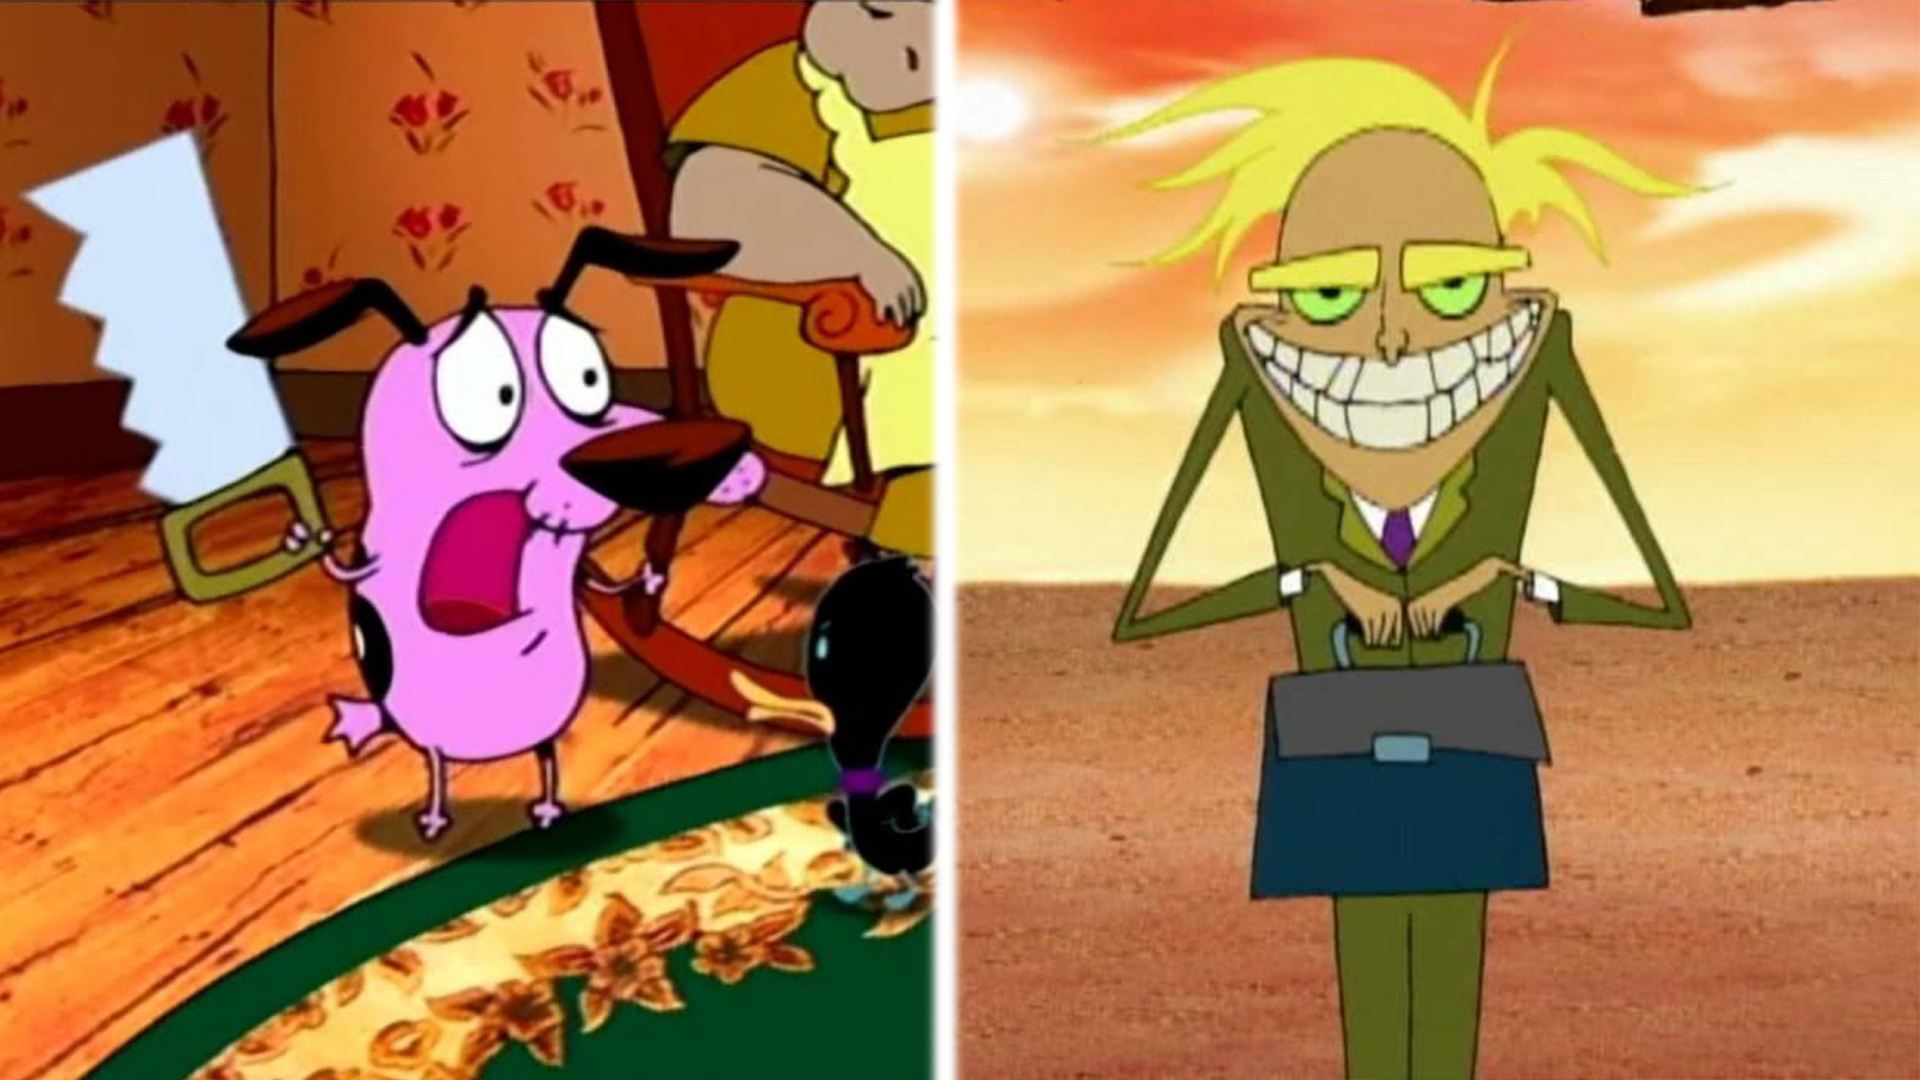 All Episodes of 'Courage the Cowardly Dog' are Now on HBO MAX - News